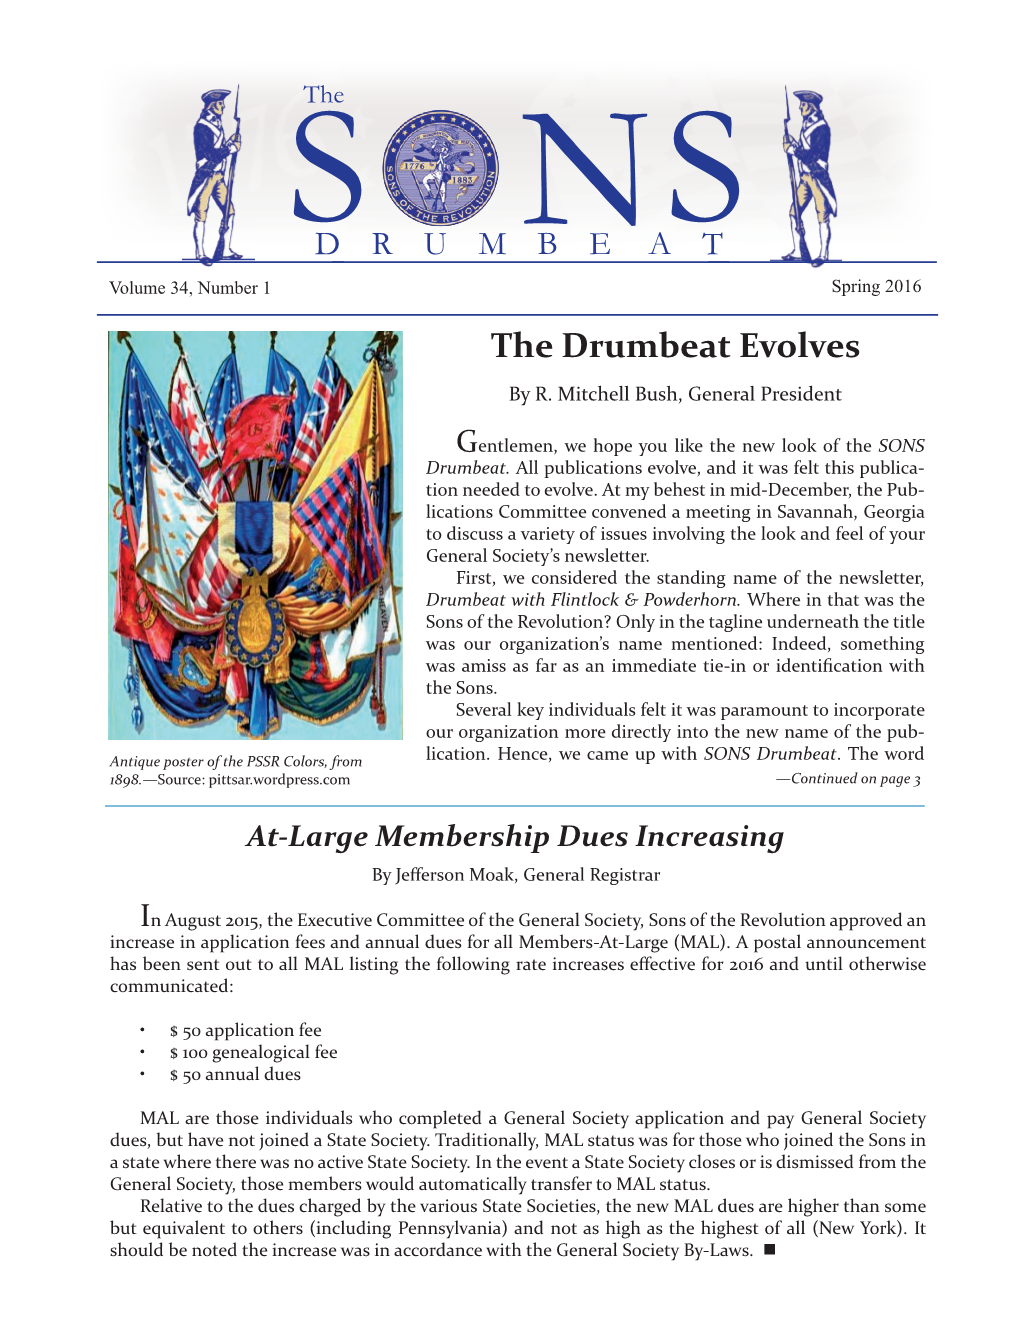 Spring 2016 the Drumbeat Evolves by R